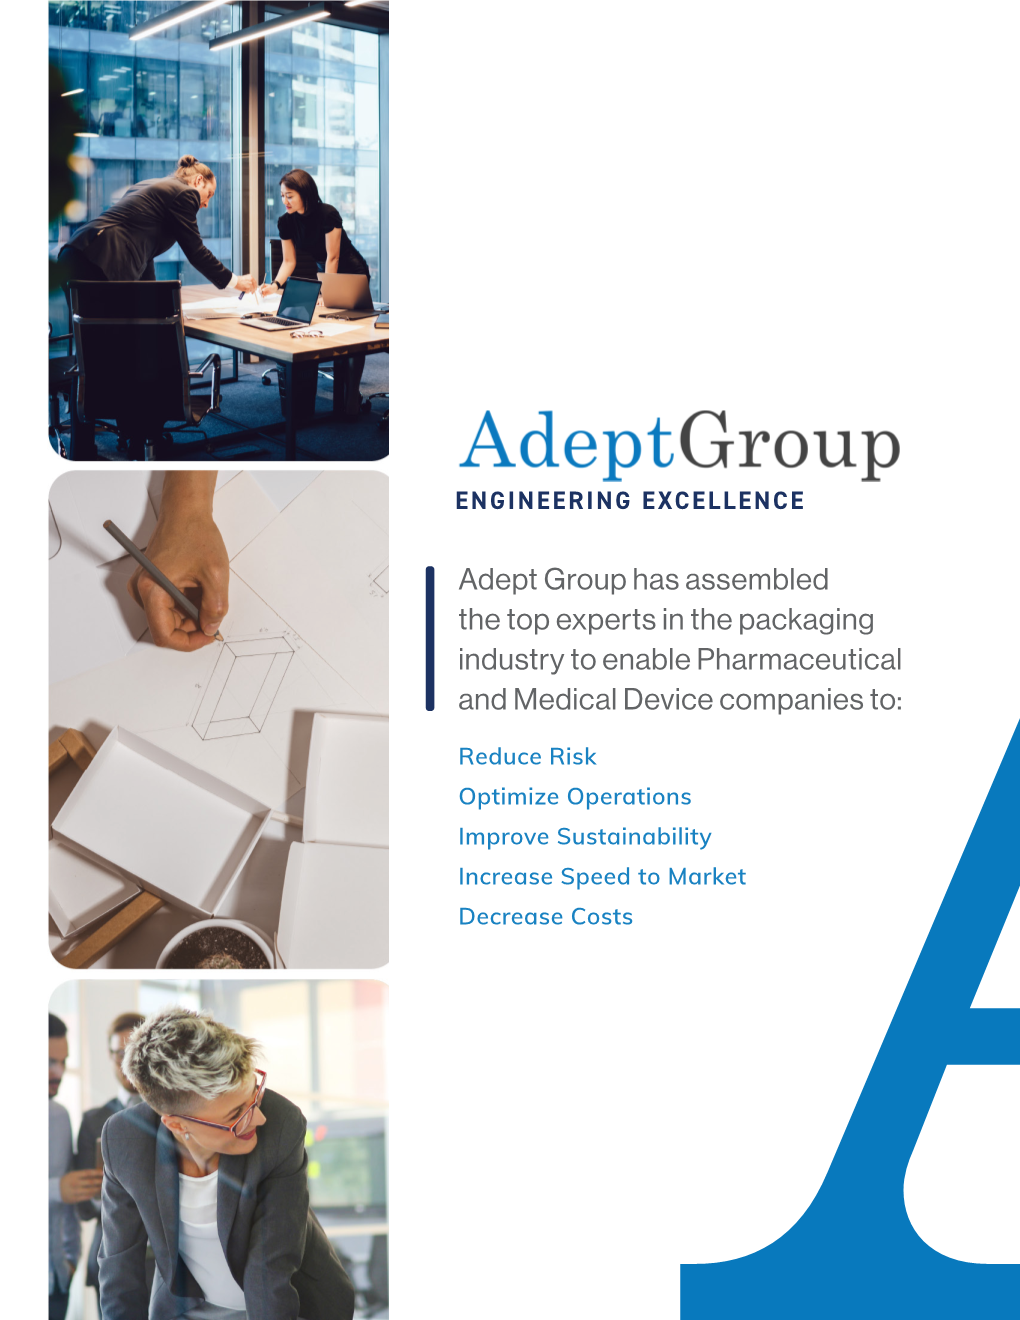 Adept Group Has Assembled the Top Experts in the Packaging Industry to Enable Pharmaceutical and Medical Device Companies To